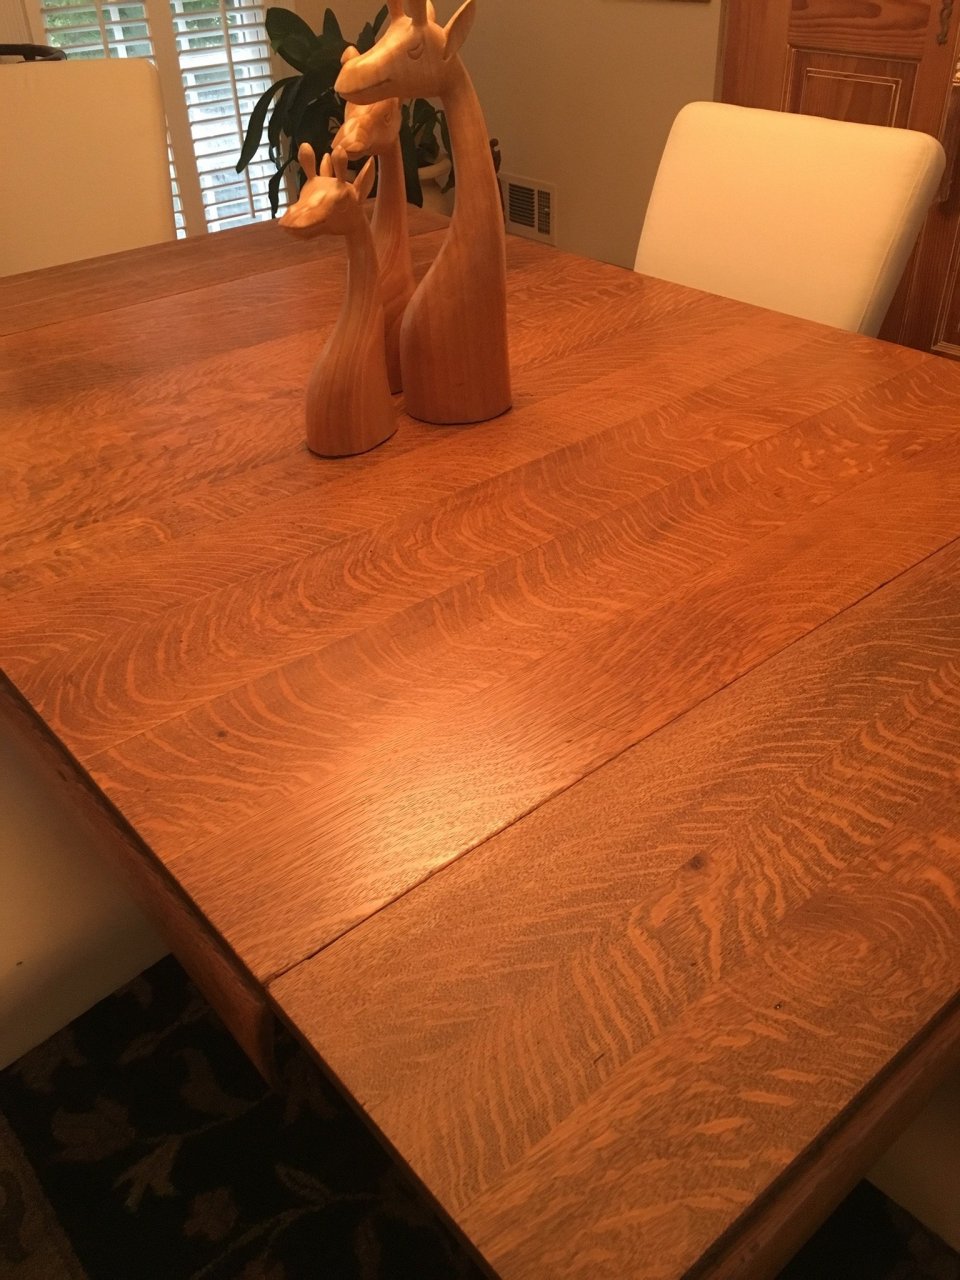 Antique Tiger Oak Extension Dining Room Table | My Antique Furniture